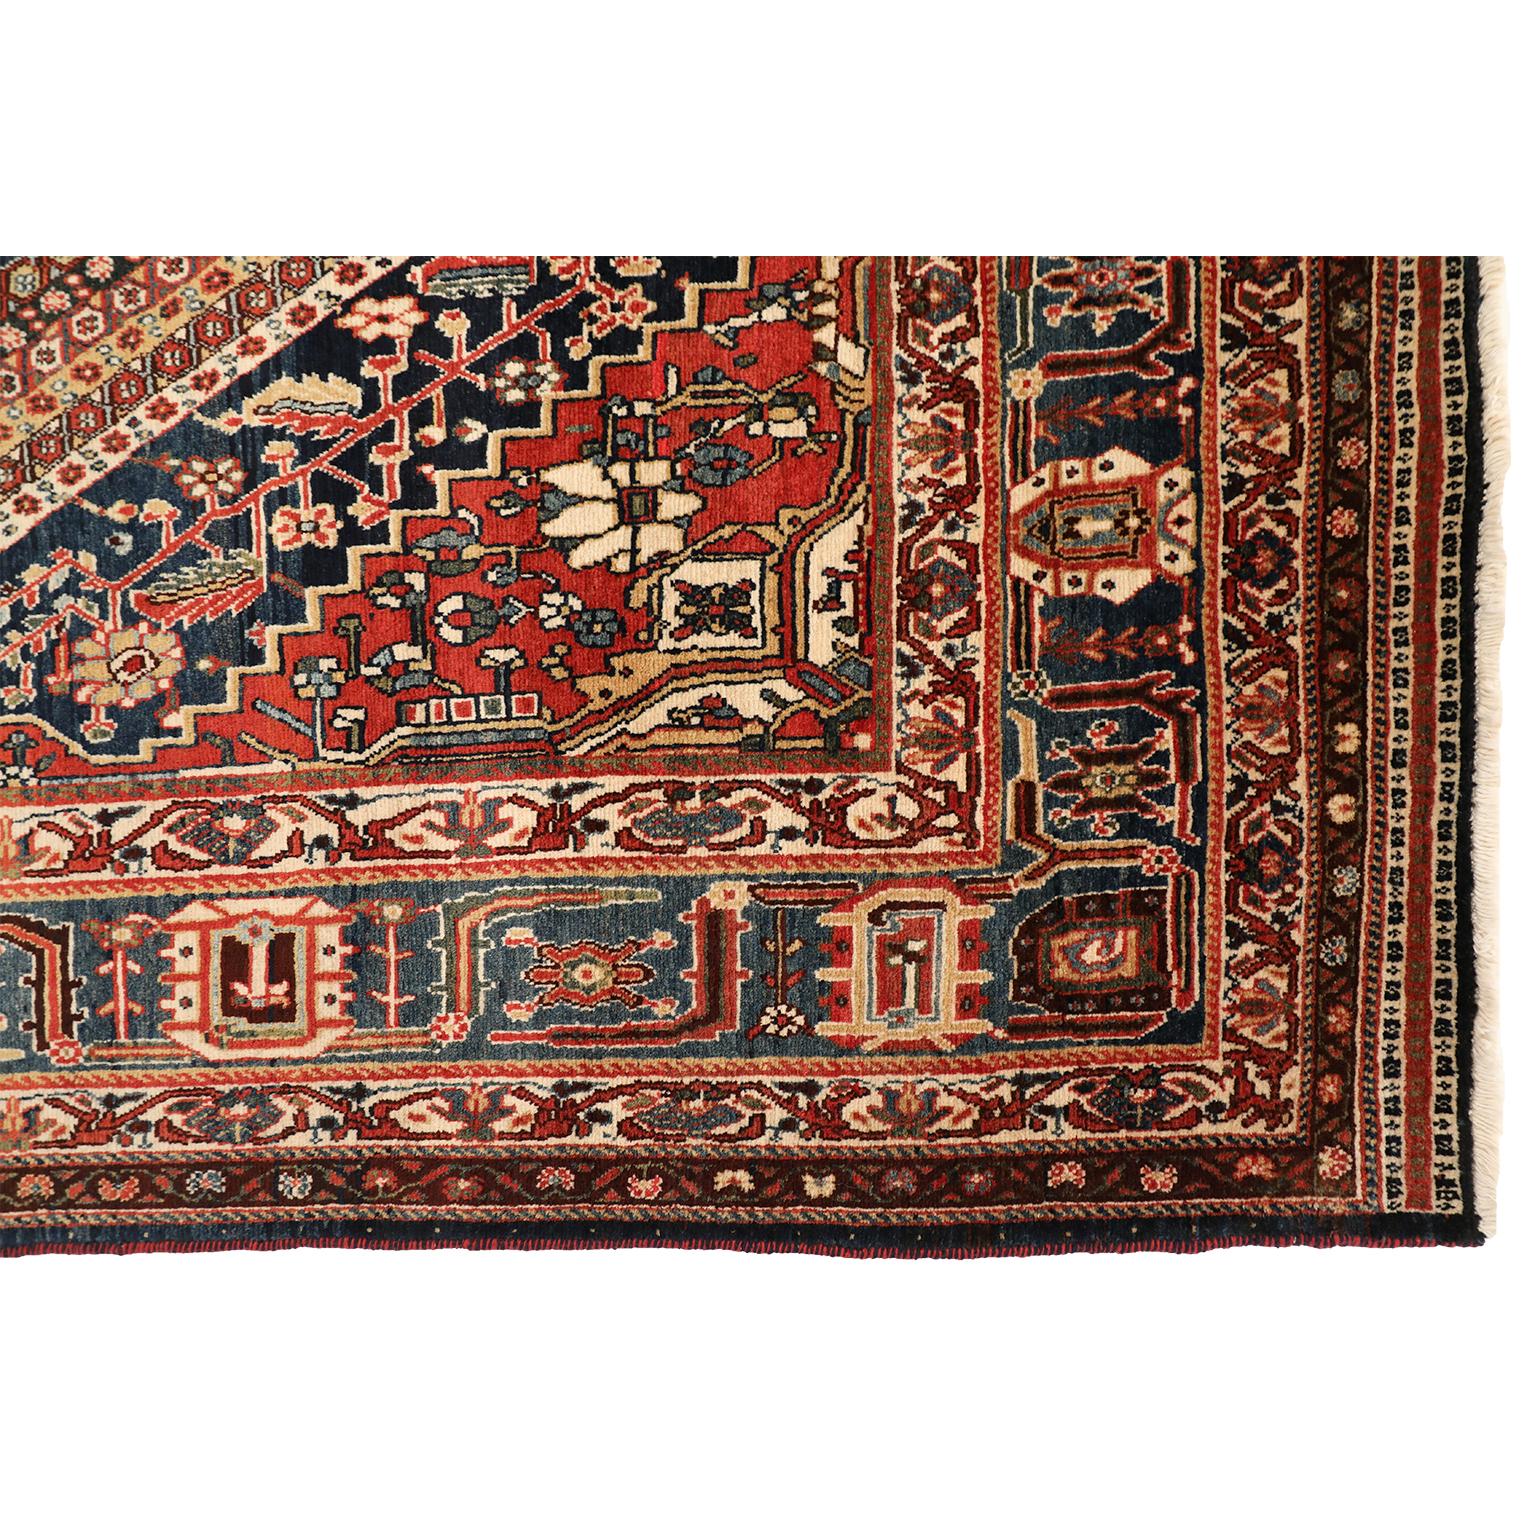 Early 20th Century Antique 1920s Qashqai Persian Rug, Wool, 11' x 17' For Sale